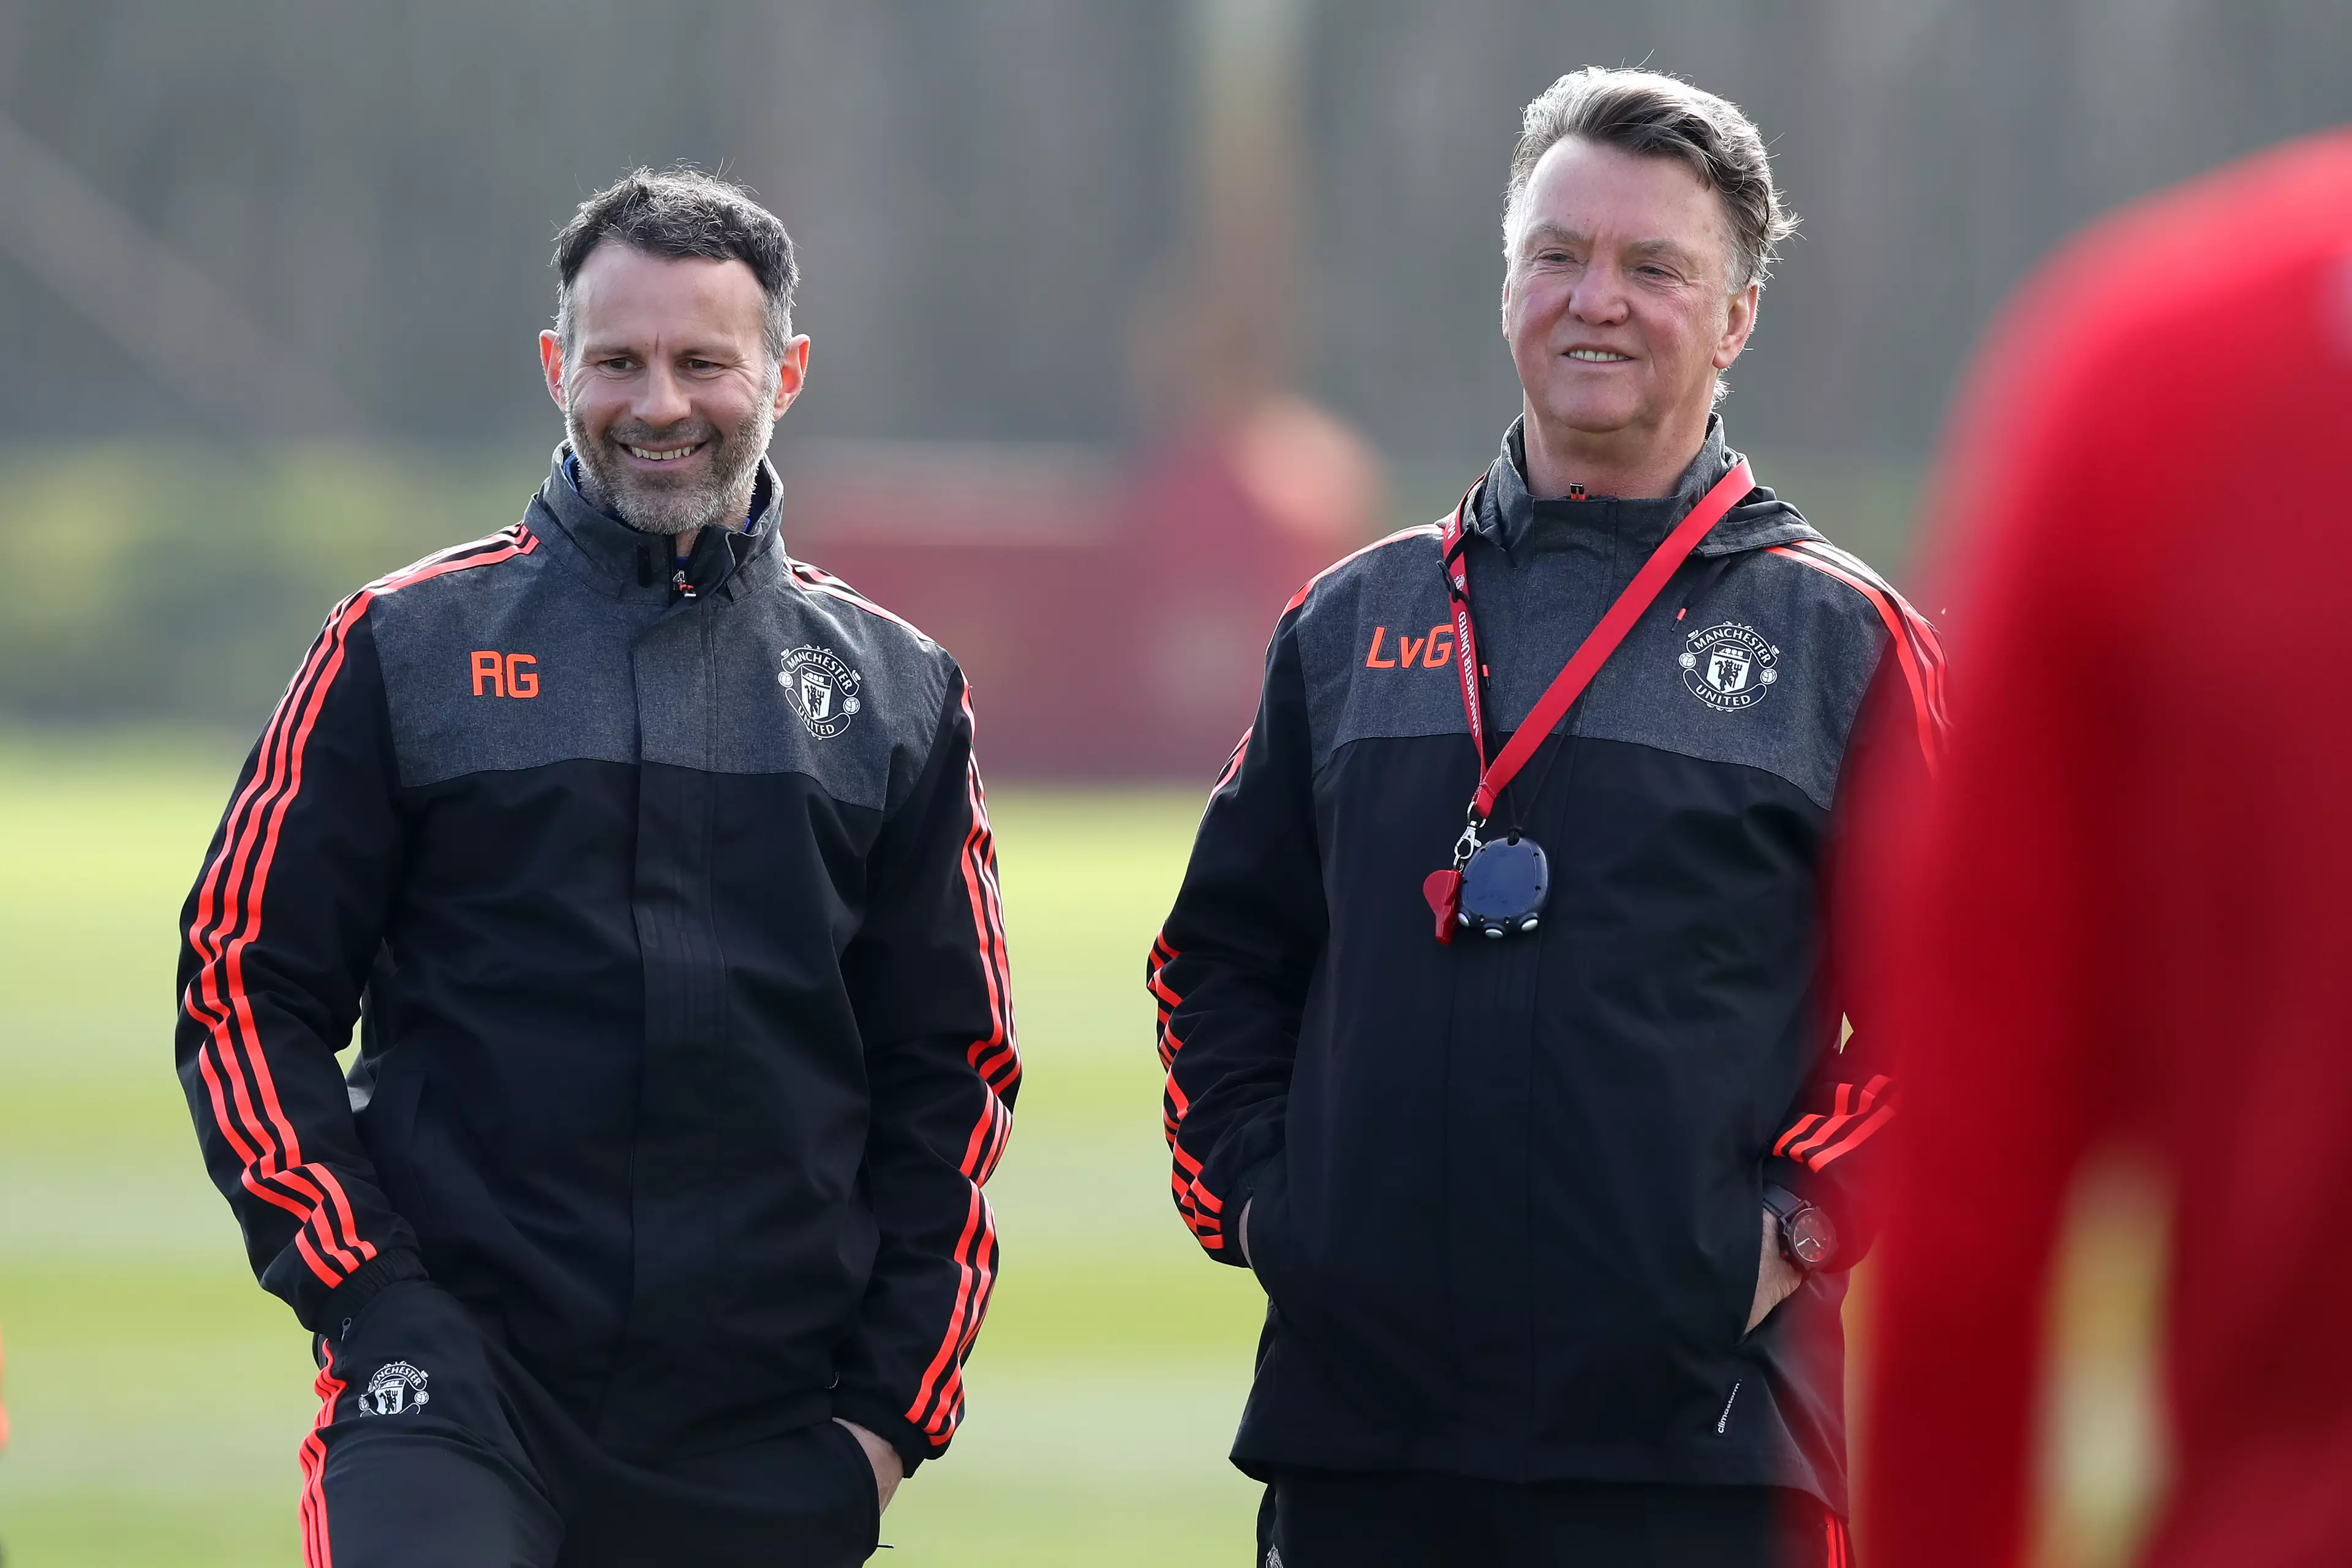 Giggs was assistant manager under Louis van Gaal. Image: PA Images